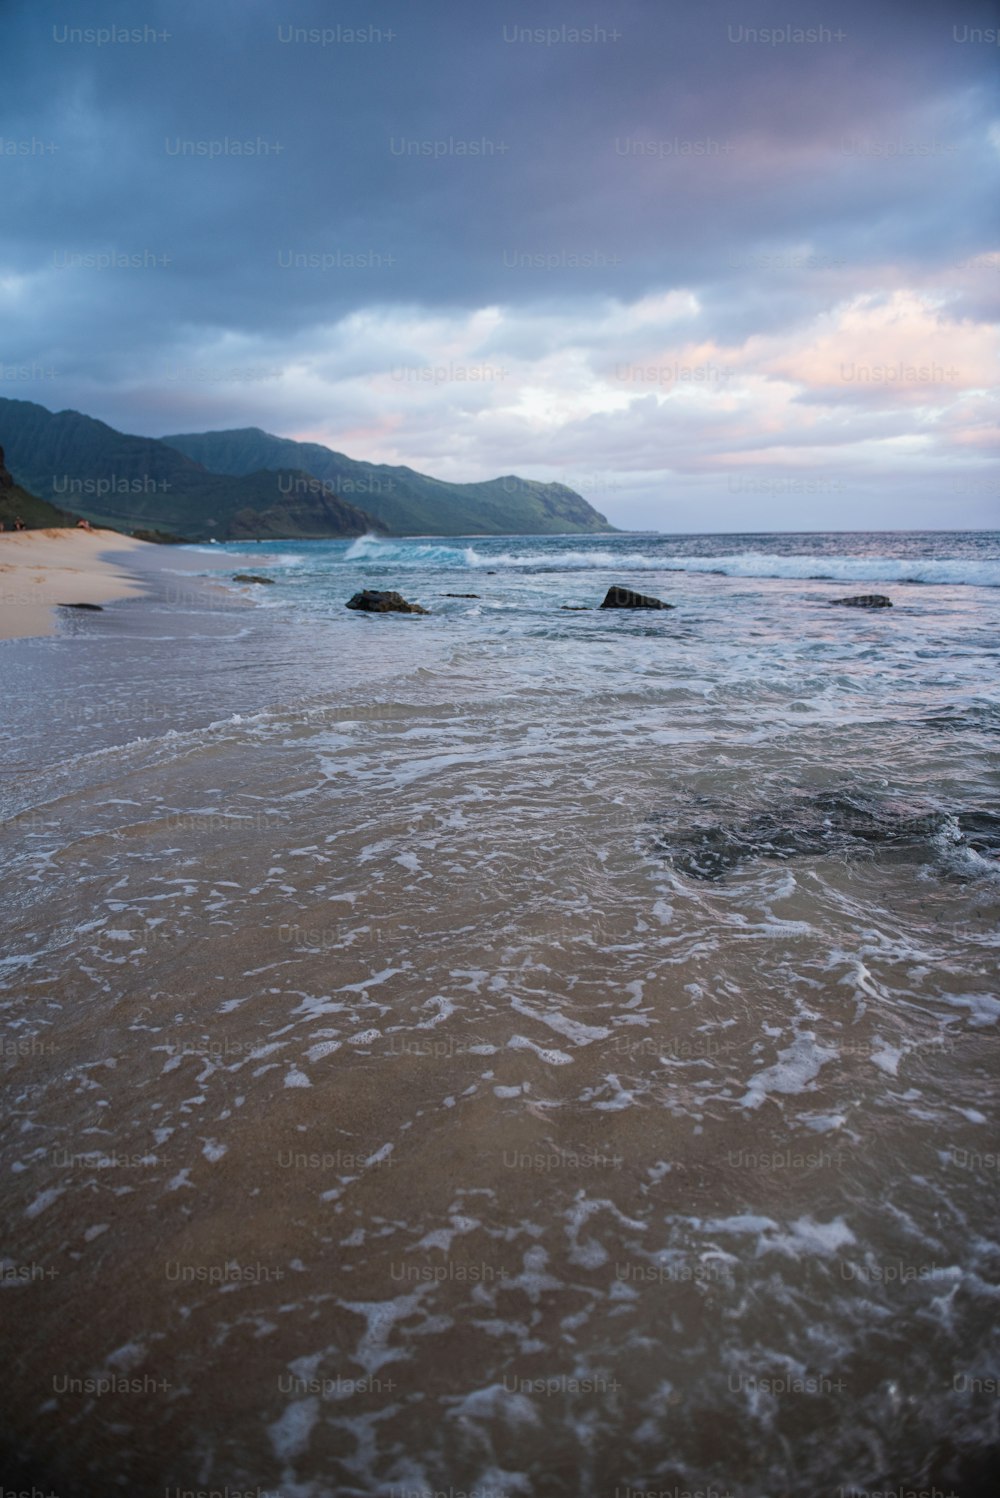 a body of water with waves and a beach with hills in the background